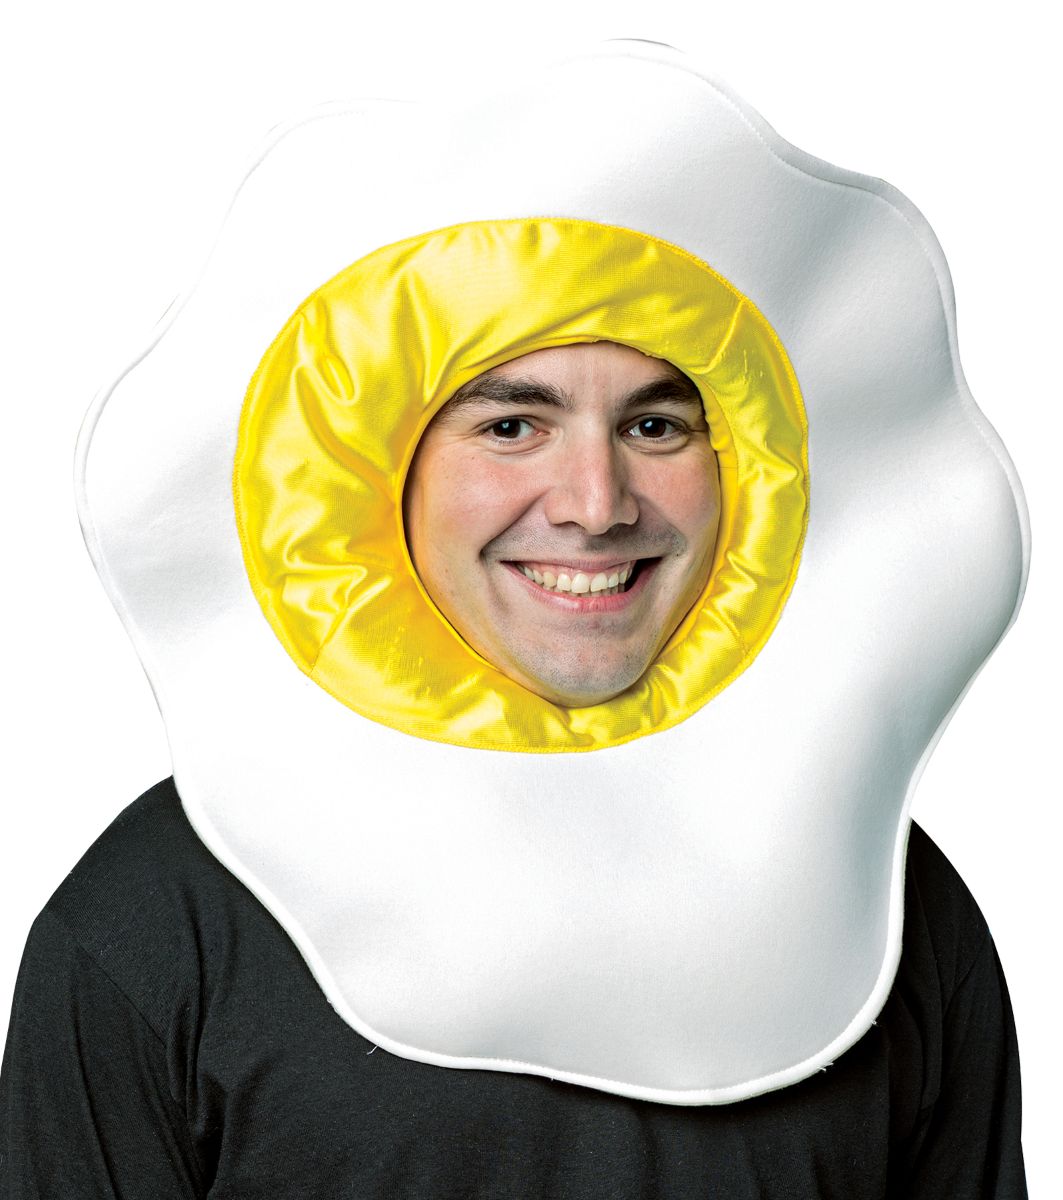 The Costume Center White and Yellow Fried Egg Open Face Unisex Adult Mask Costume Accessory - One Size